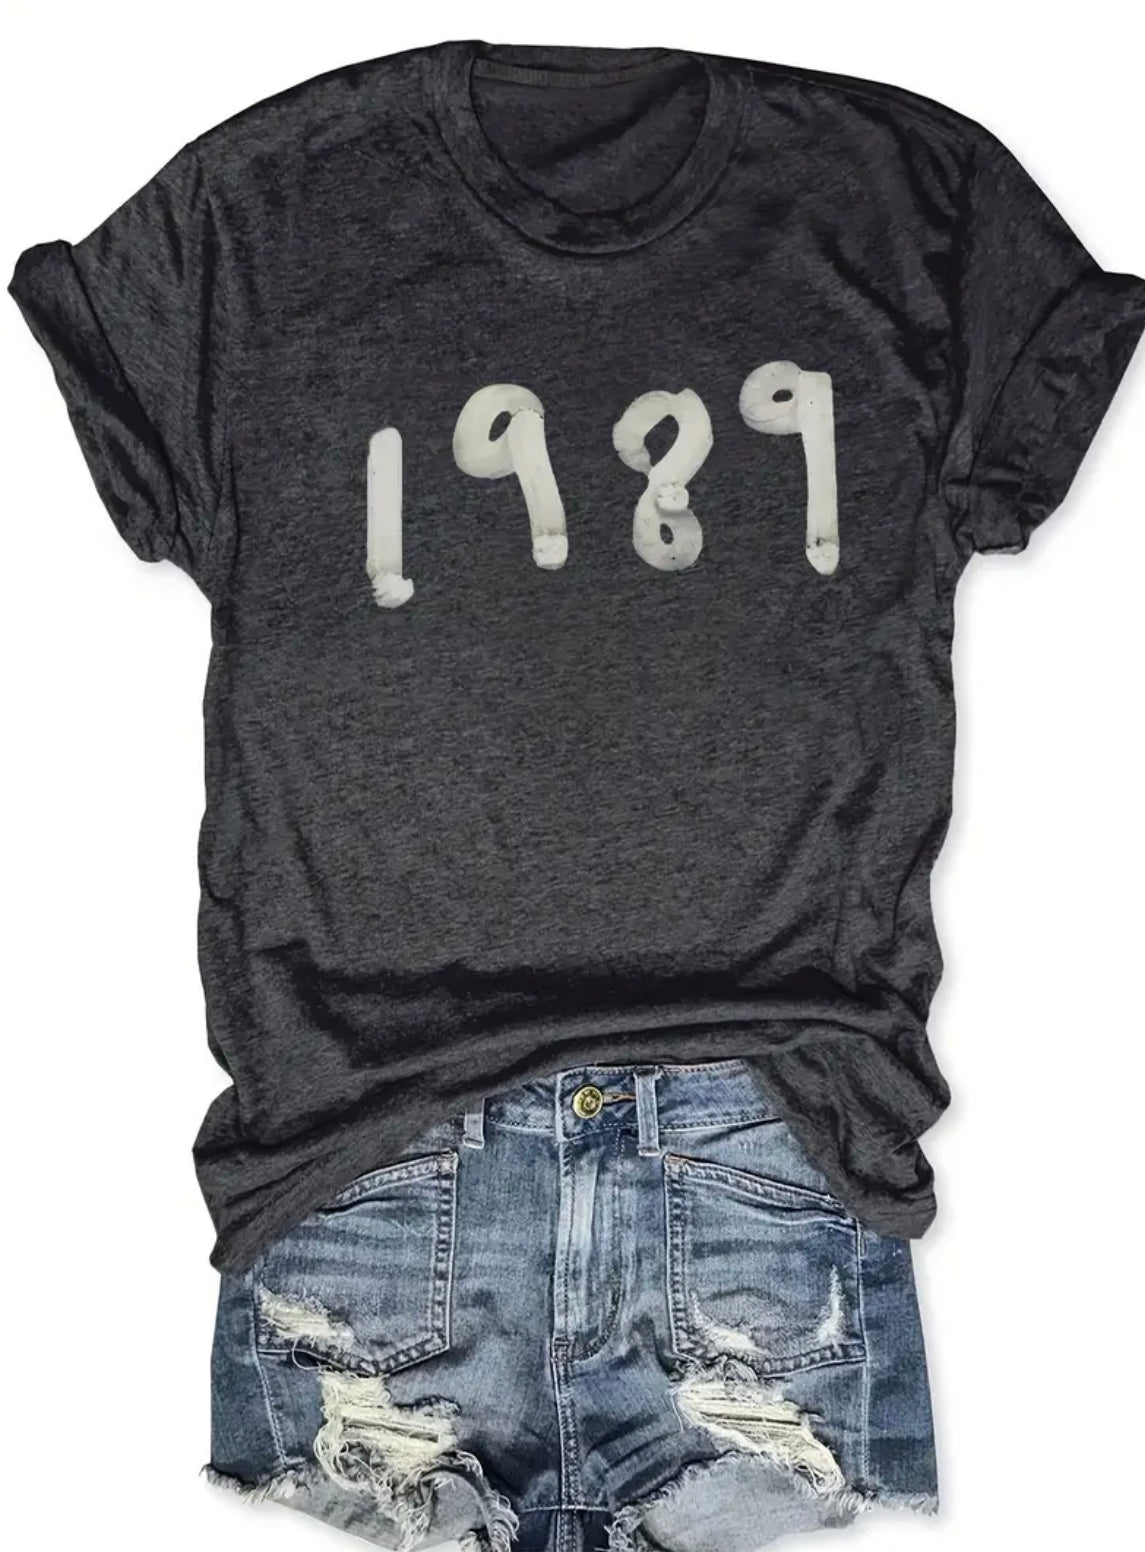 Town & Country - Taylor Swift 1989 T-Shirt